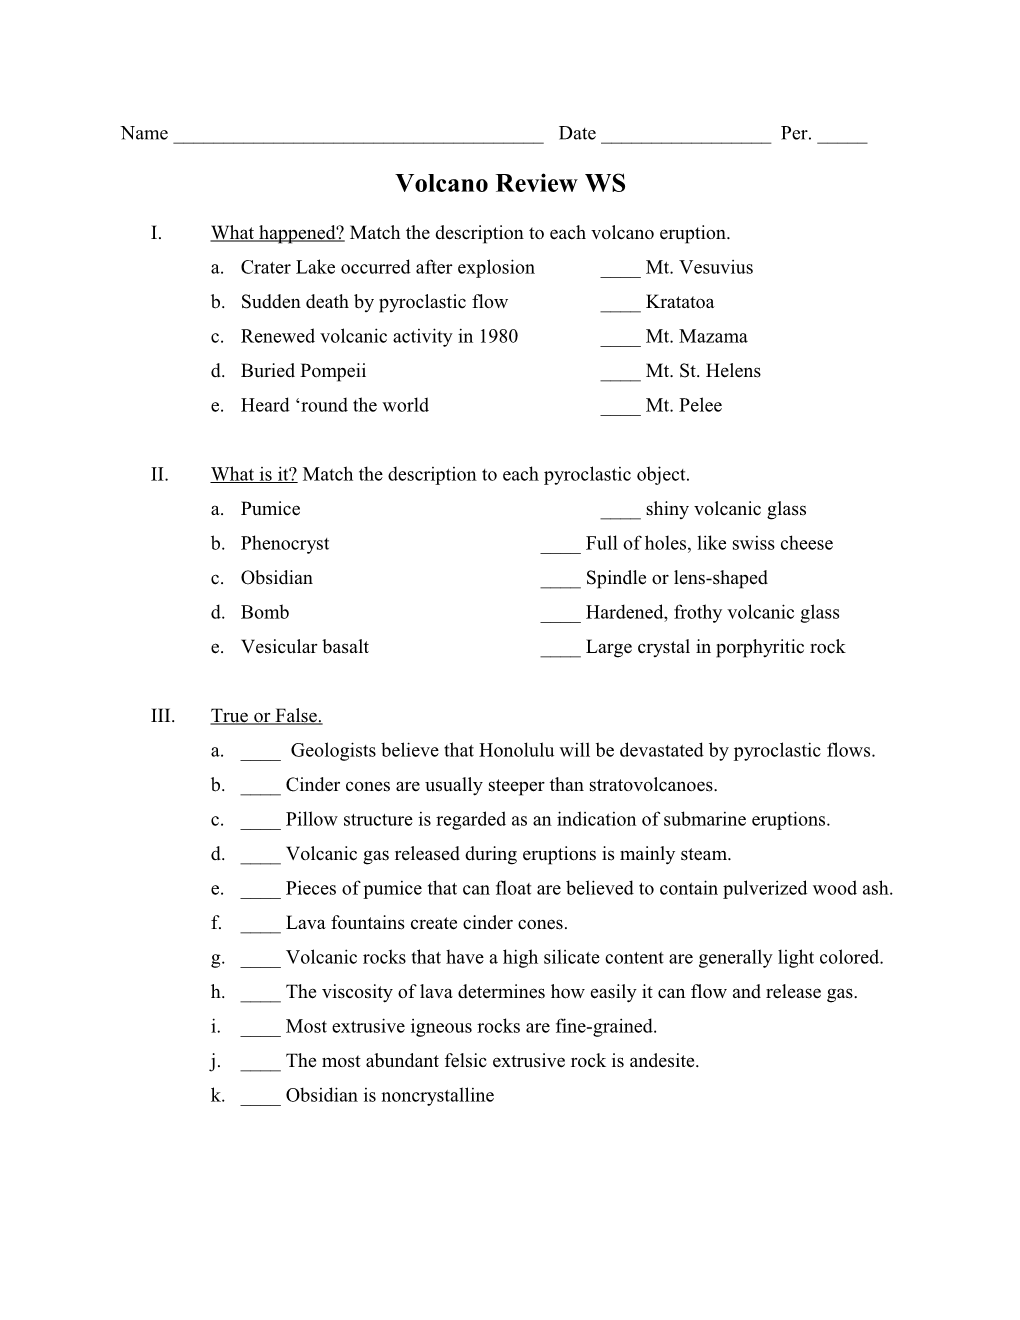 Volcano Review WS